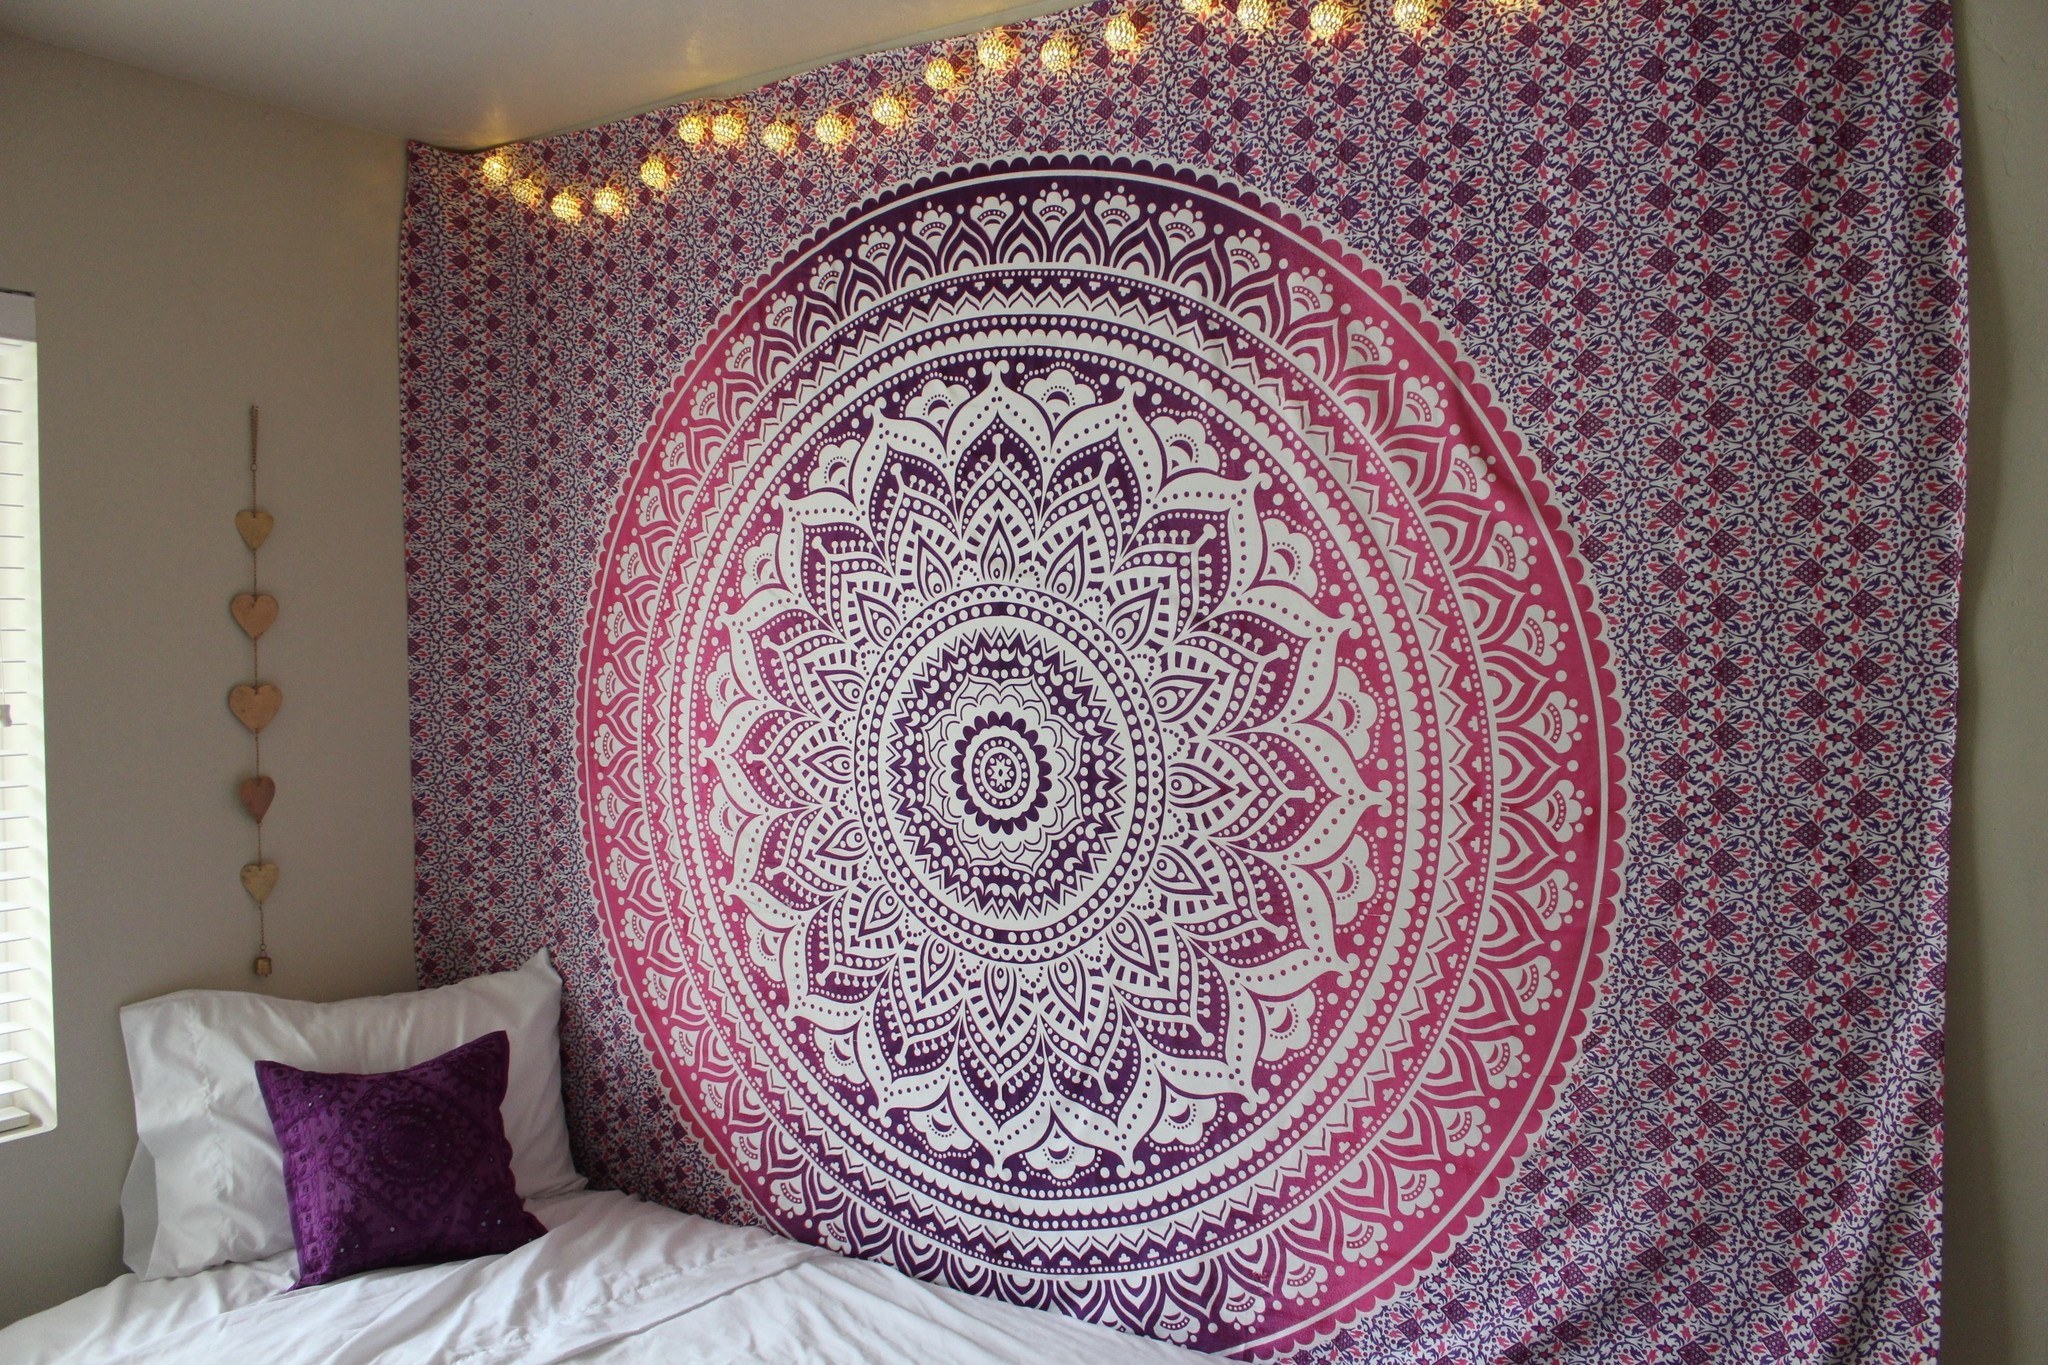 Tapestry Ombre Mandala Wall Hanging Bohemian Home Decor Cotton Poster White Art 